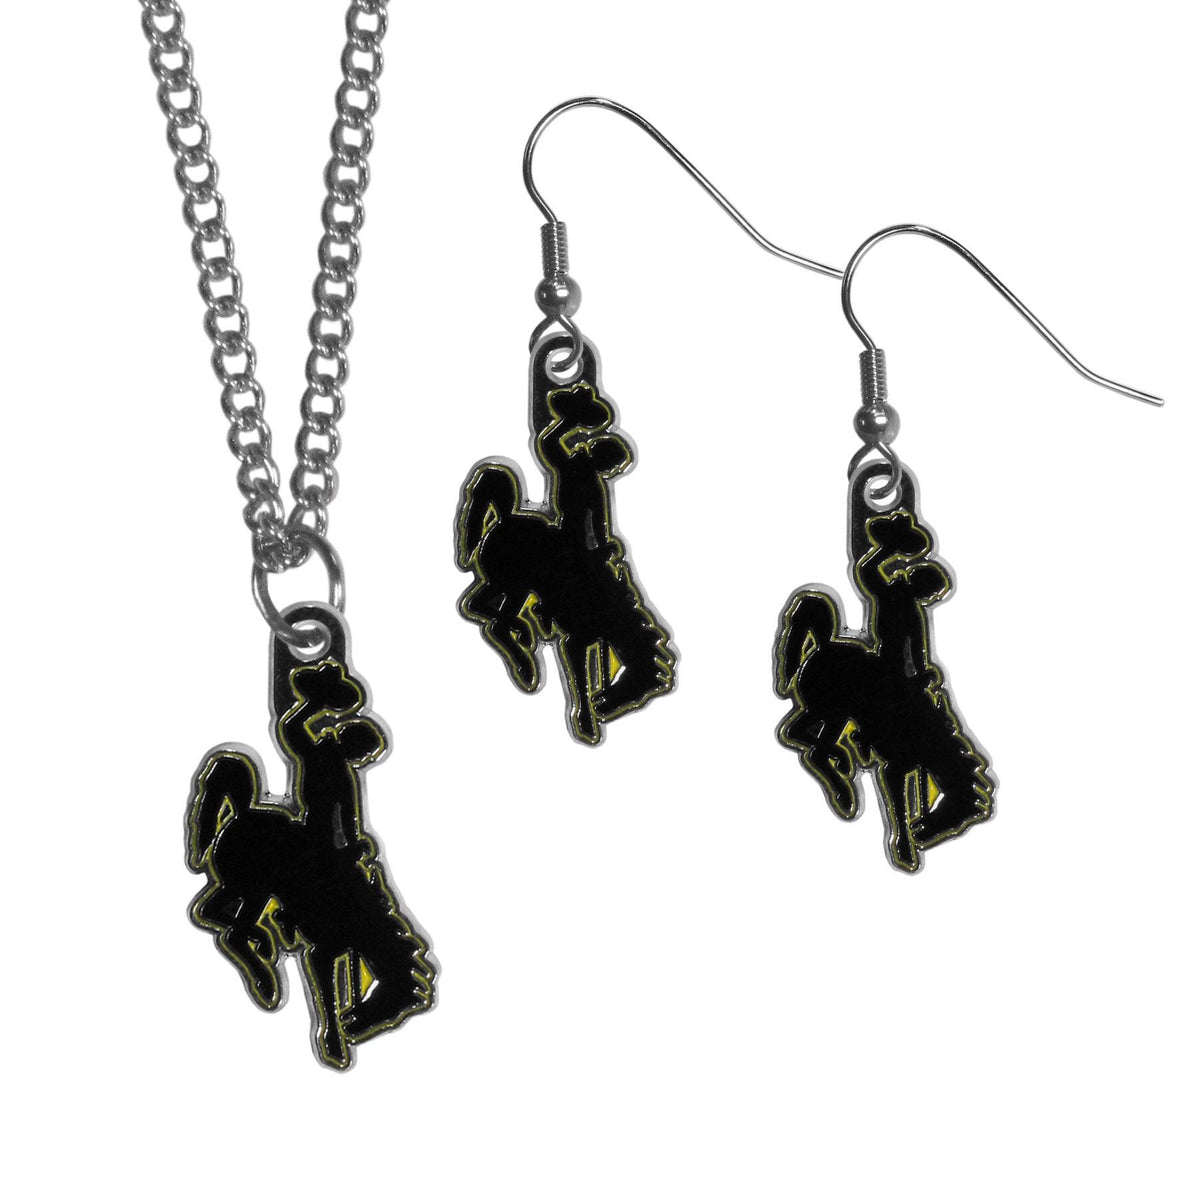 Wyoming Cowboy Dangle Earrings and Chain Necklace Set - Flyclothing LLC